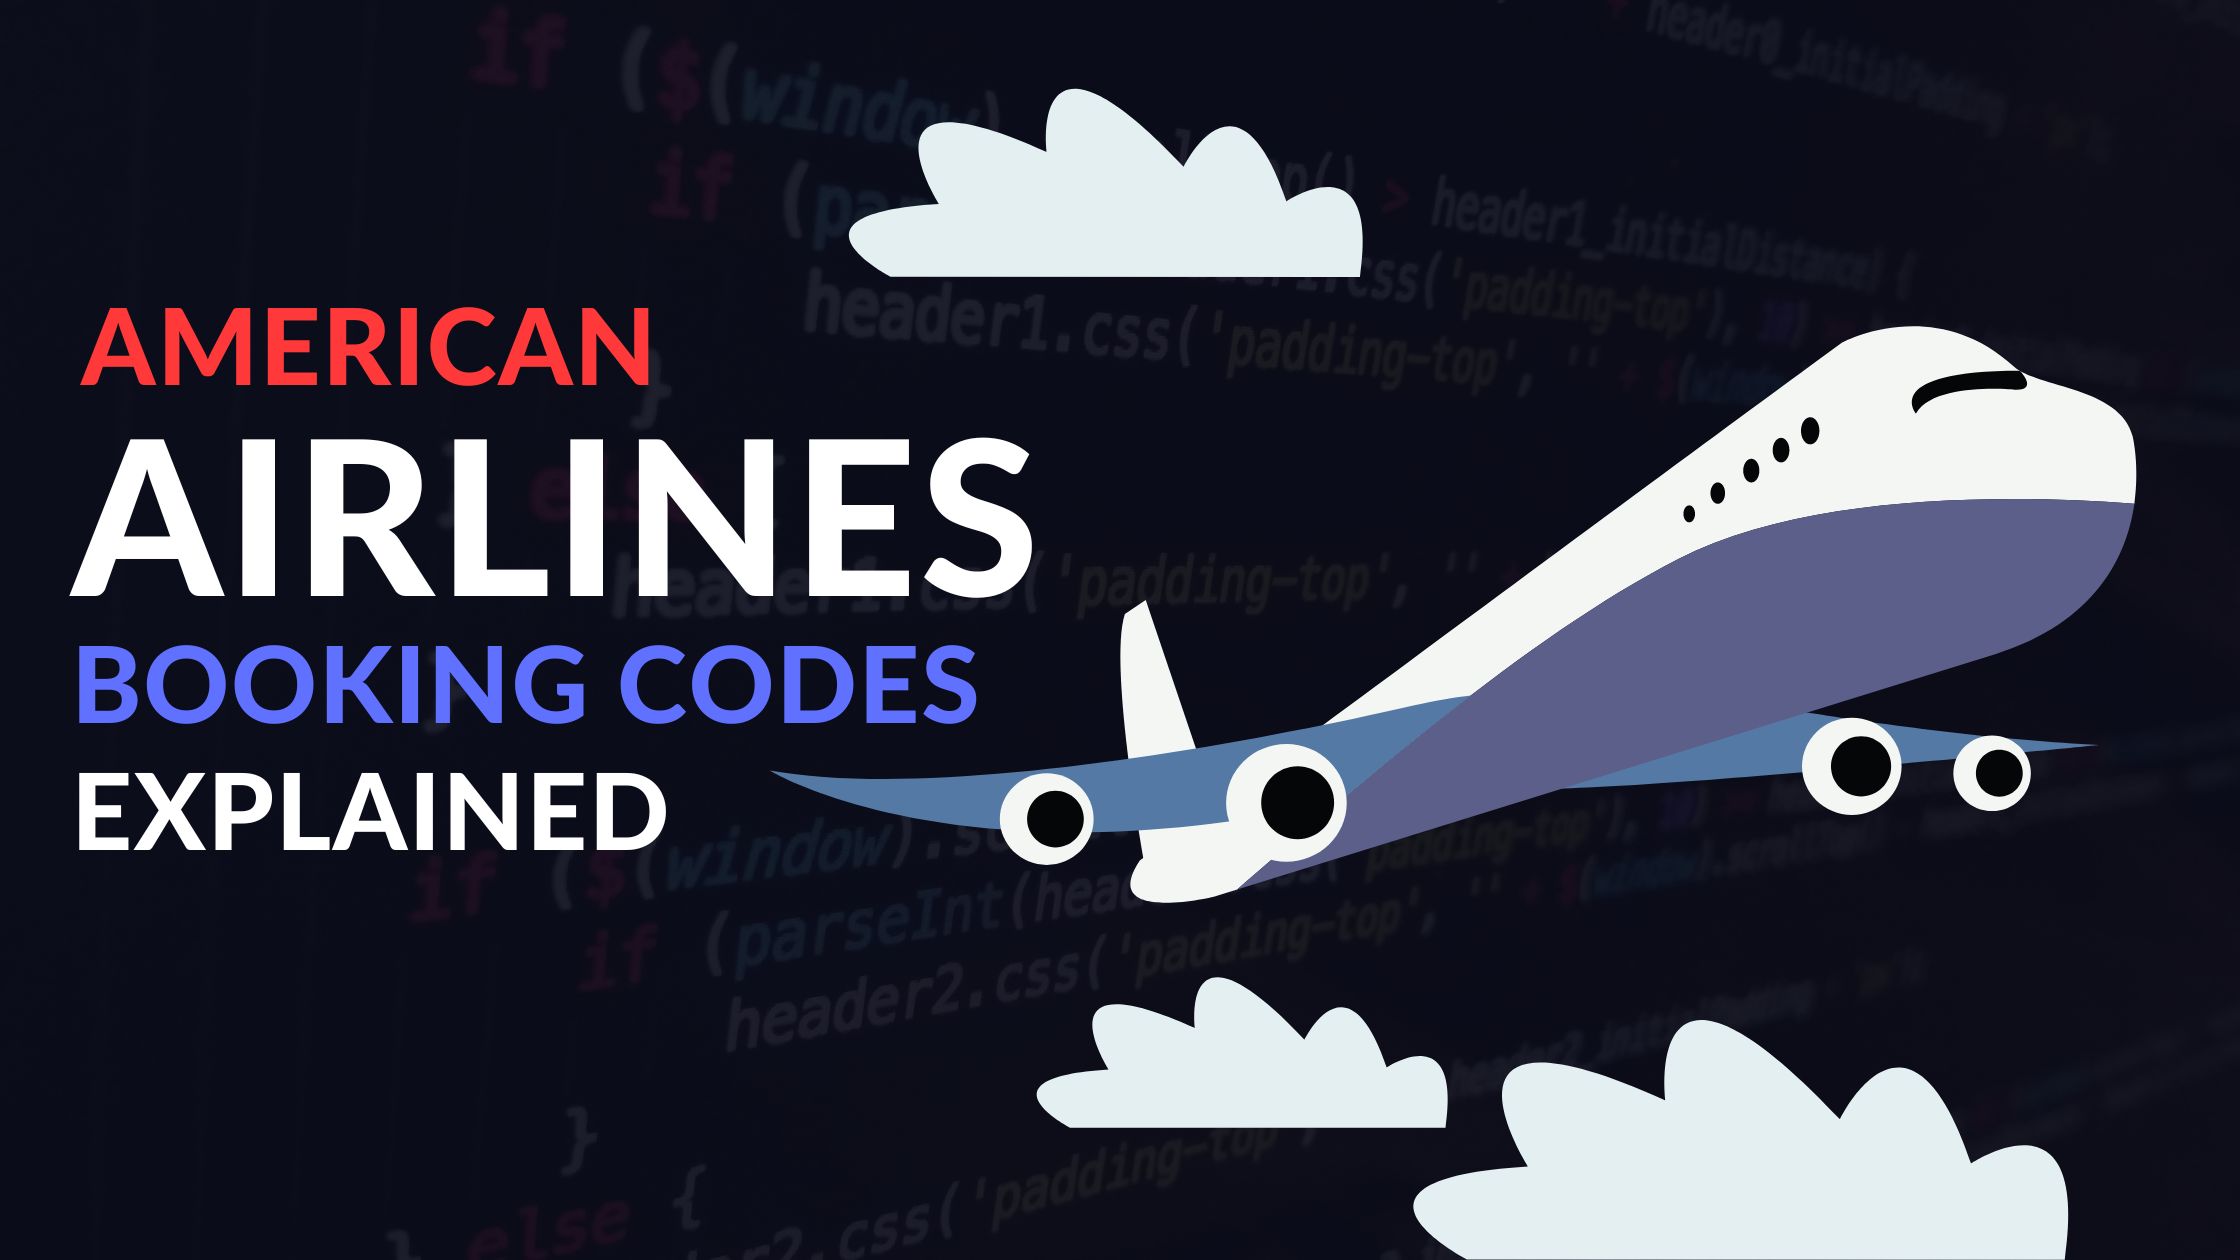 American Airlines Booking Codes Explained - Everything You Need To Know